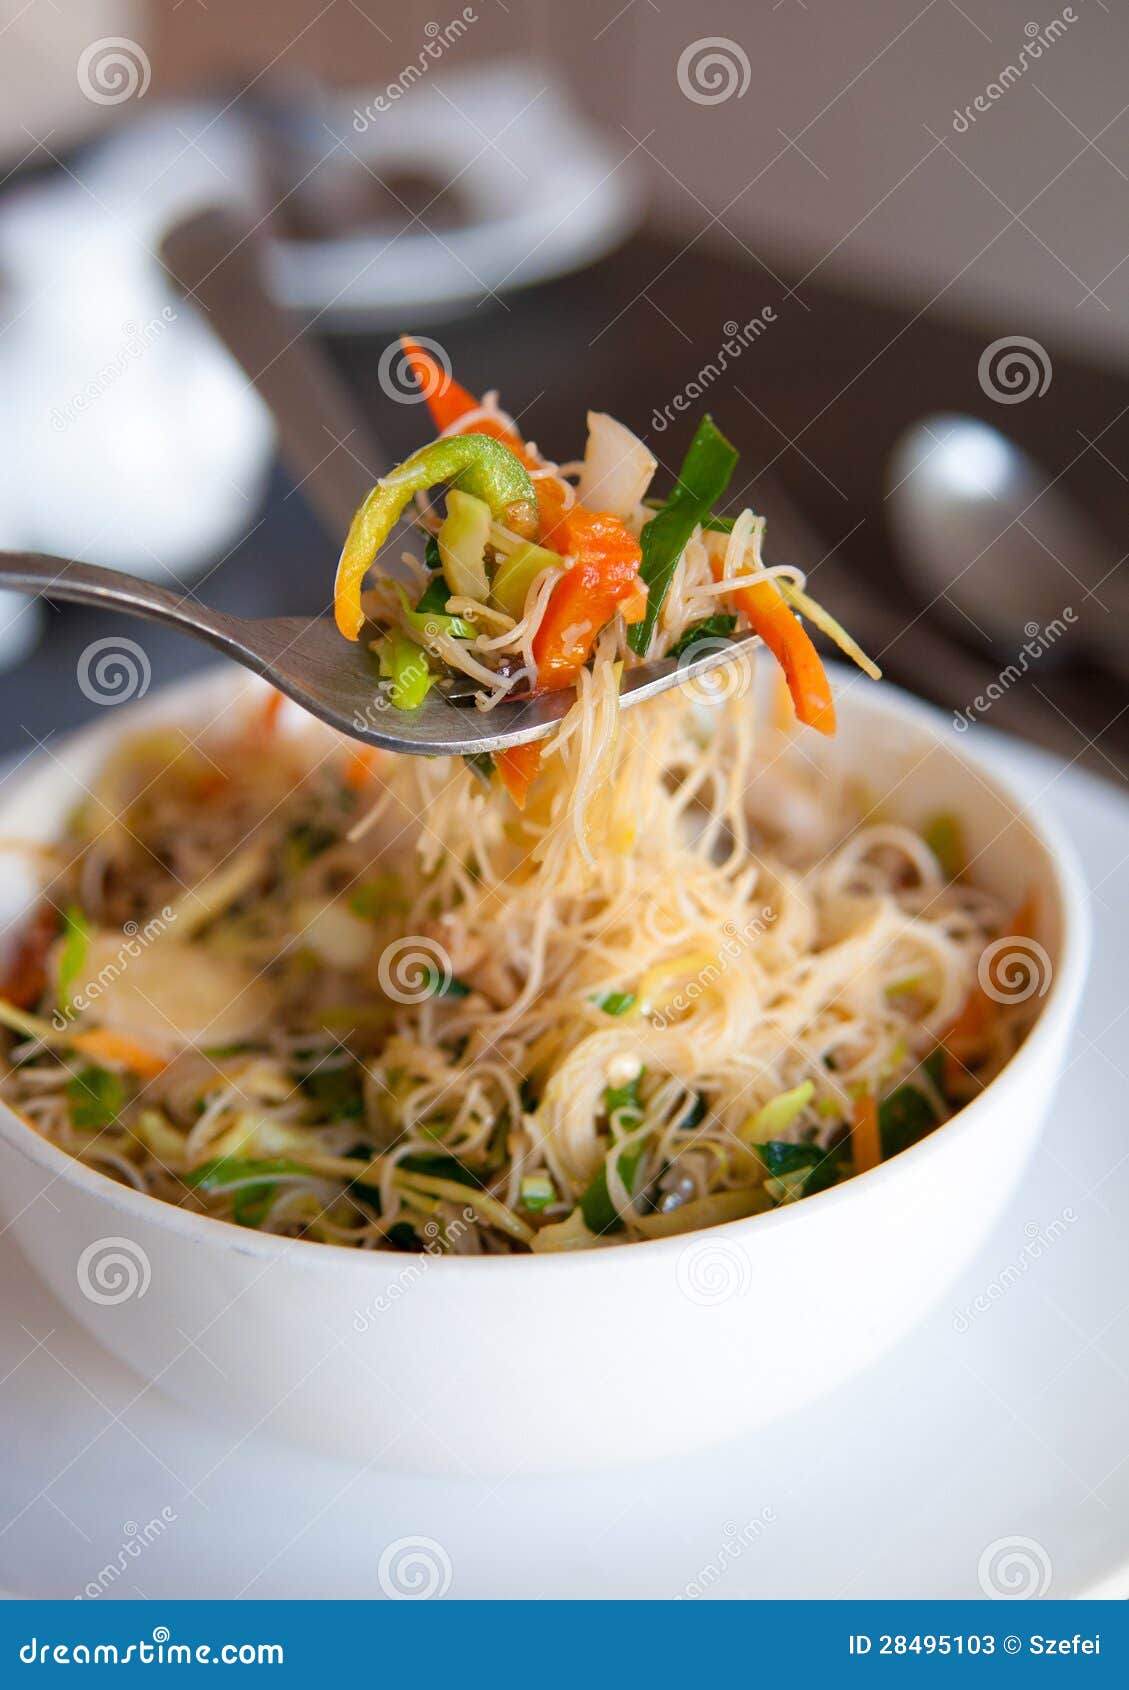 Singapore Fried Rice Noodles Stock Image - Image of noodle, dining ...